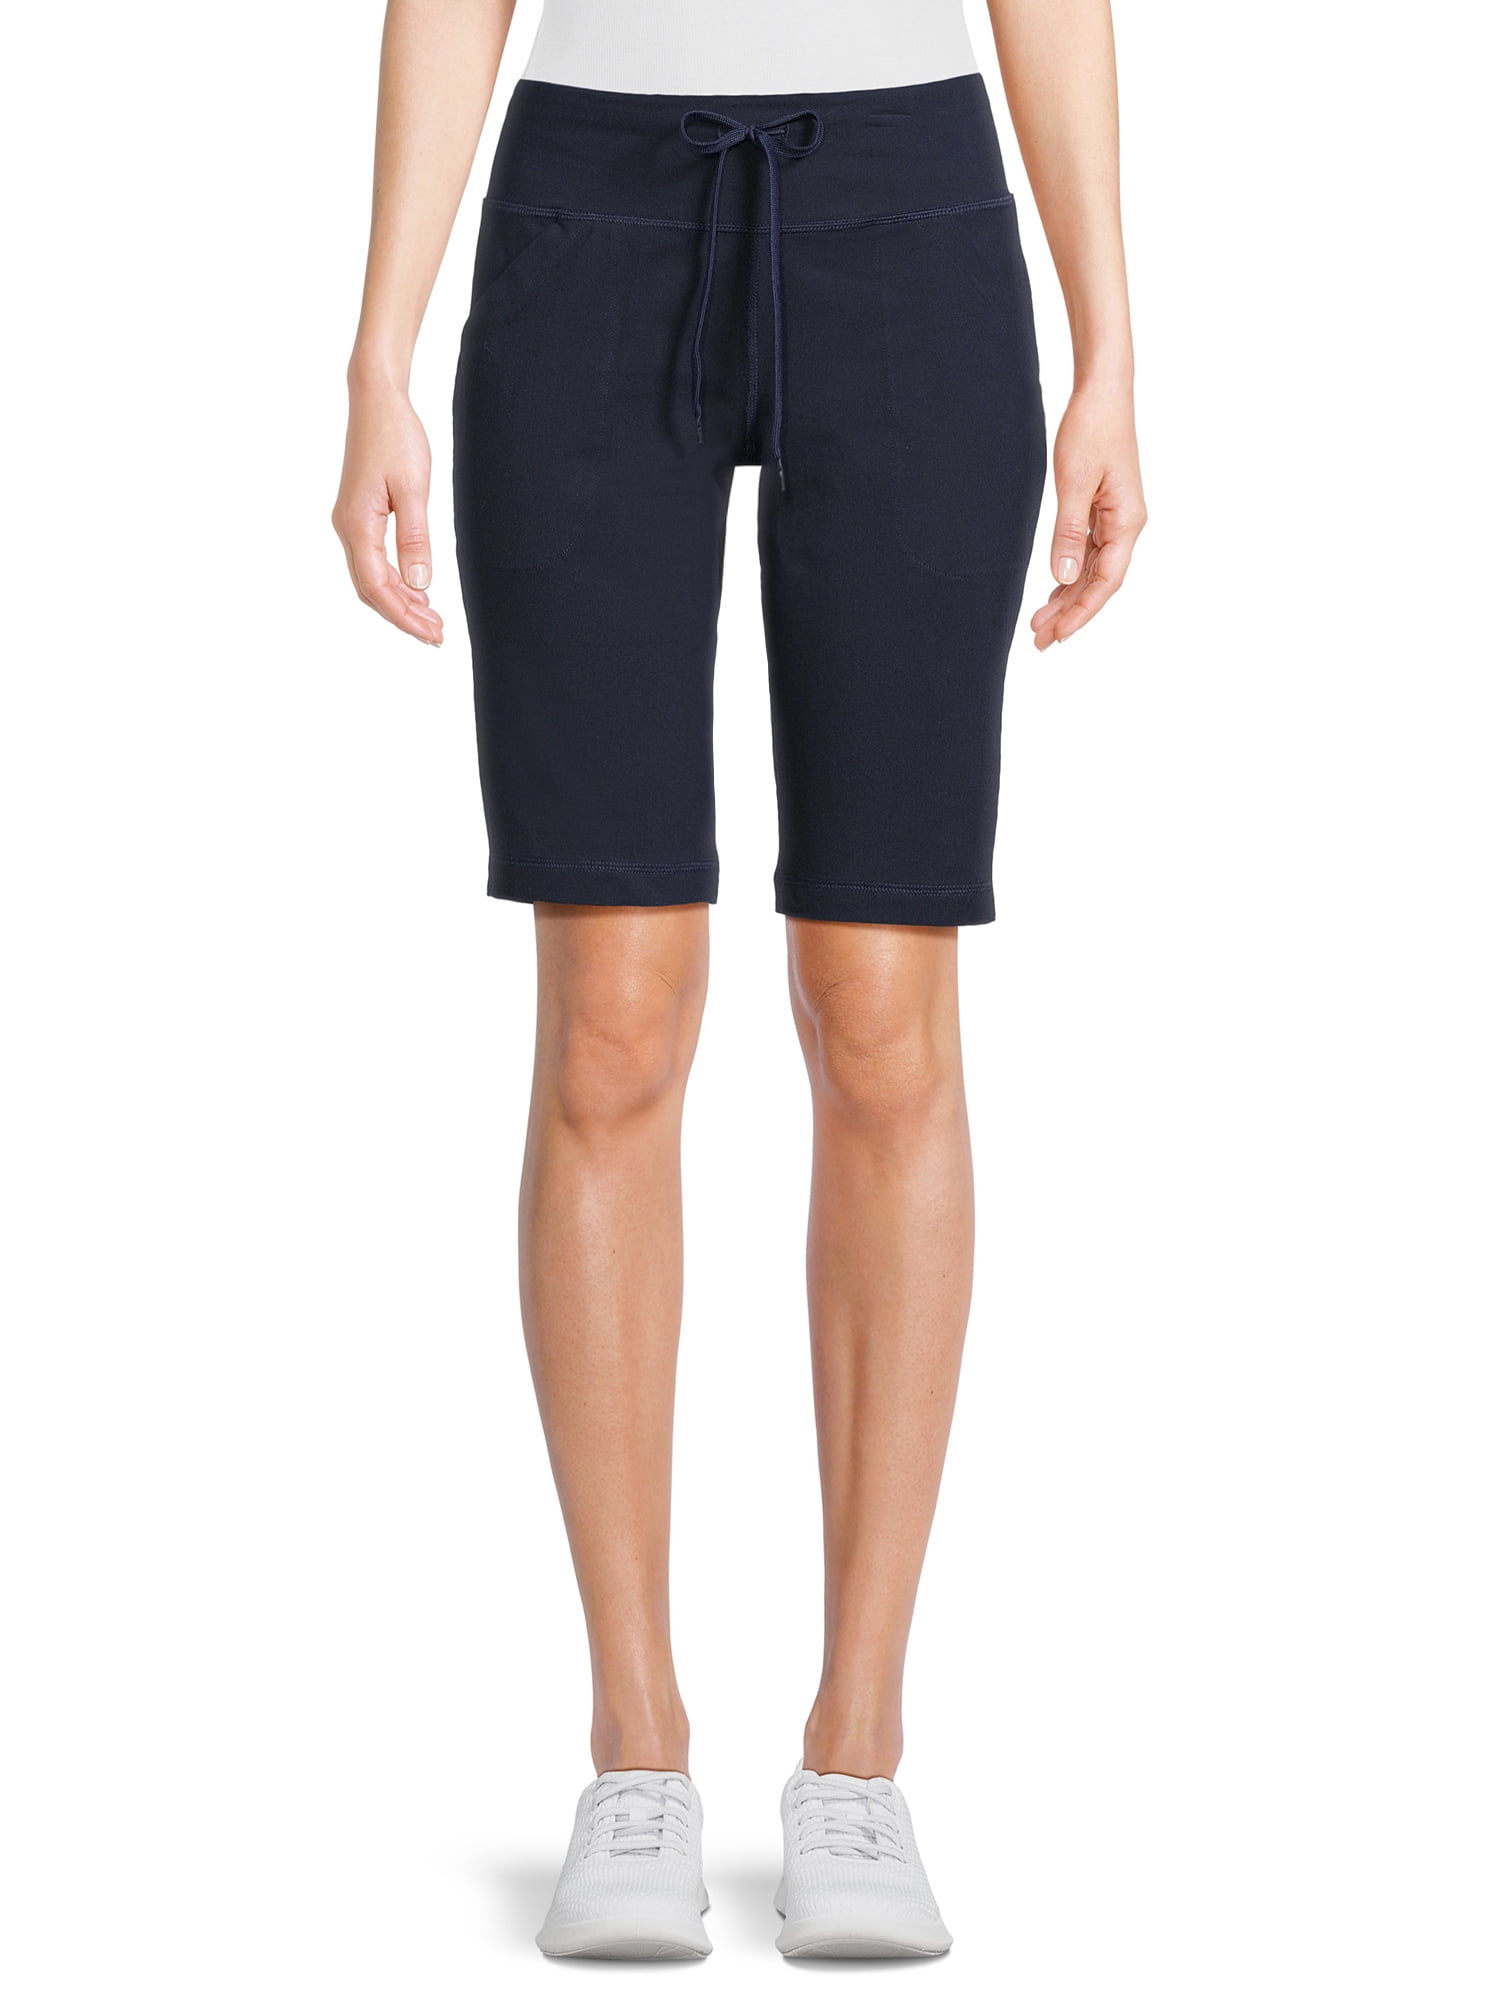 Athletic Works Women's Dri More Active 12